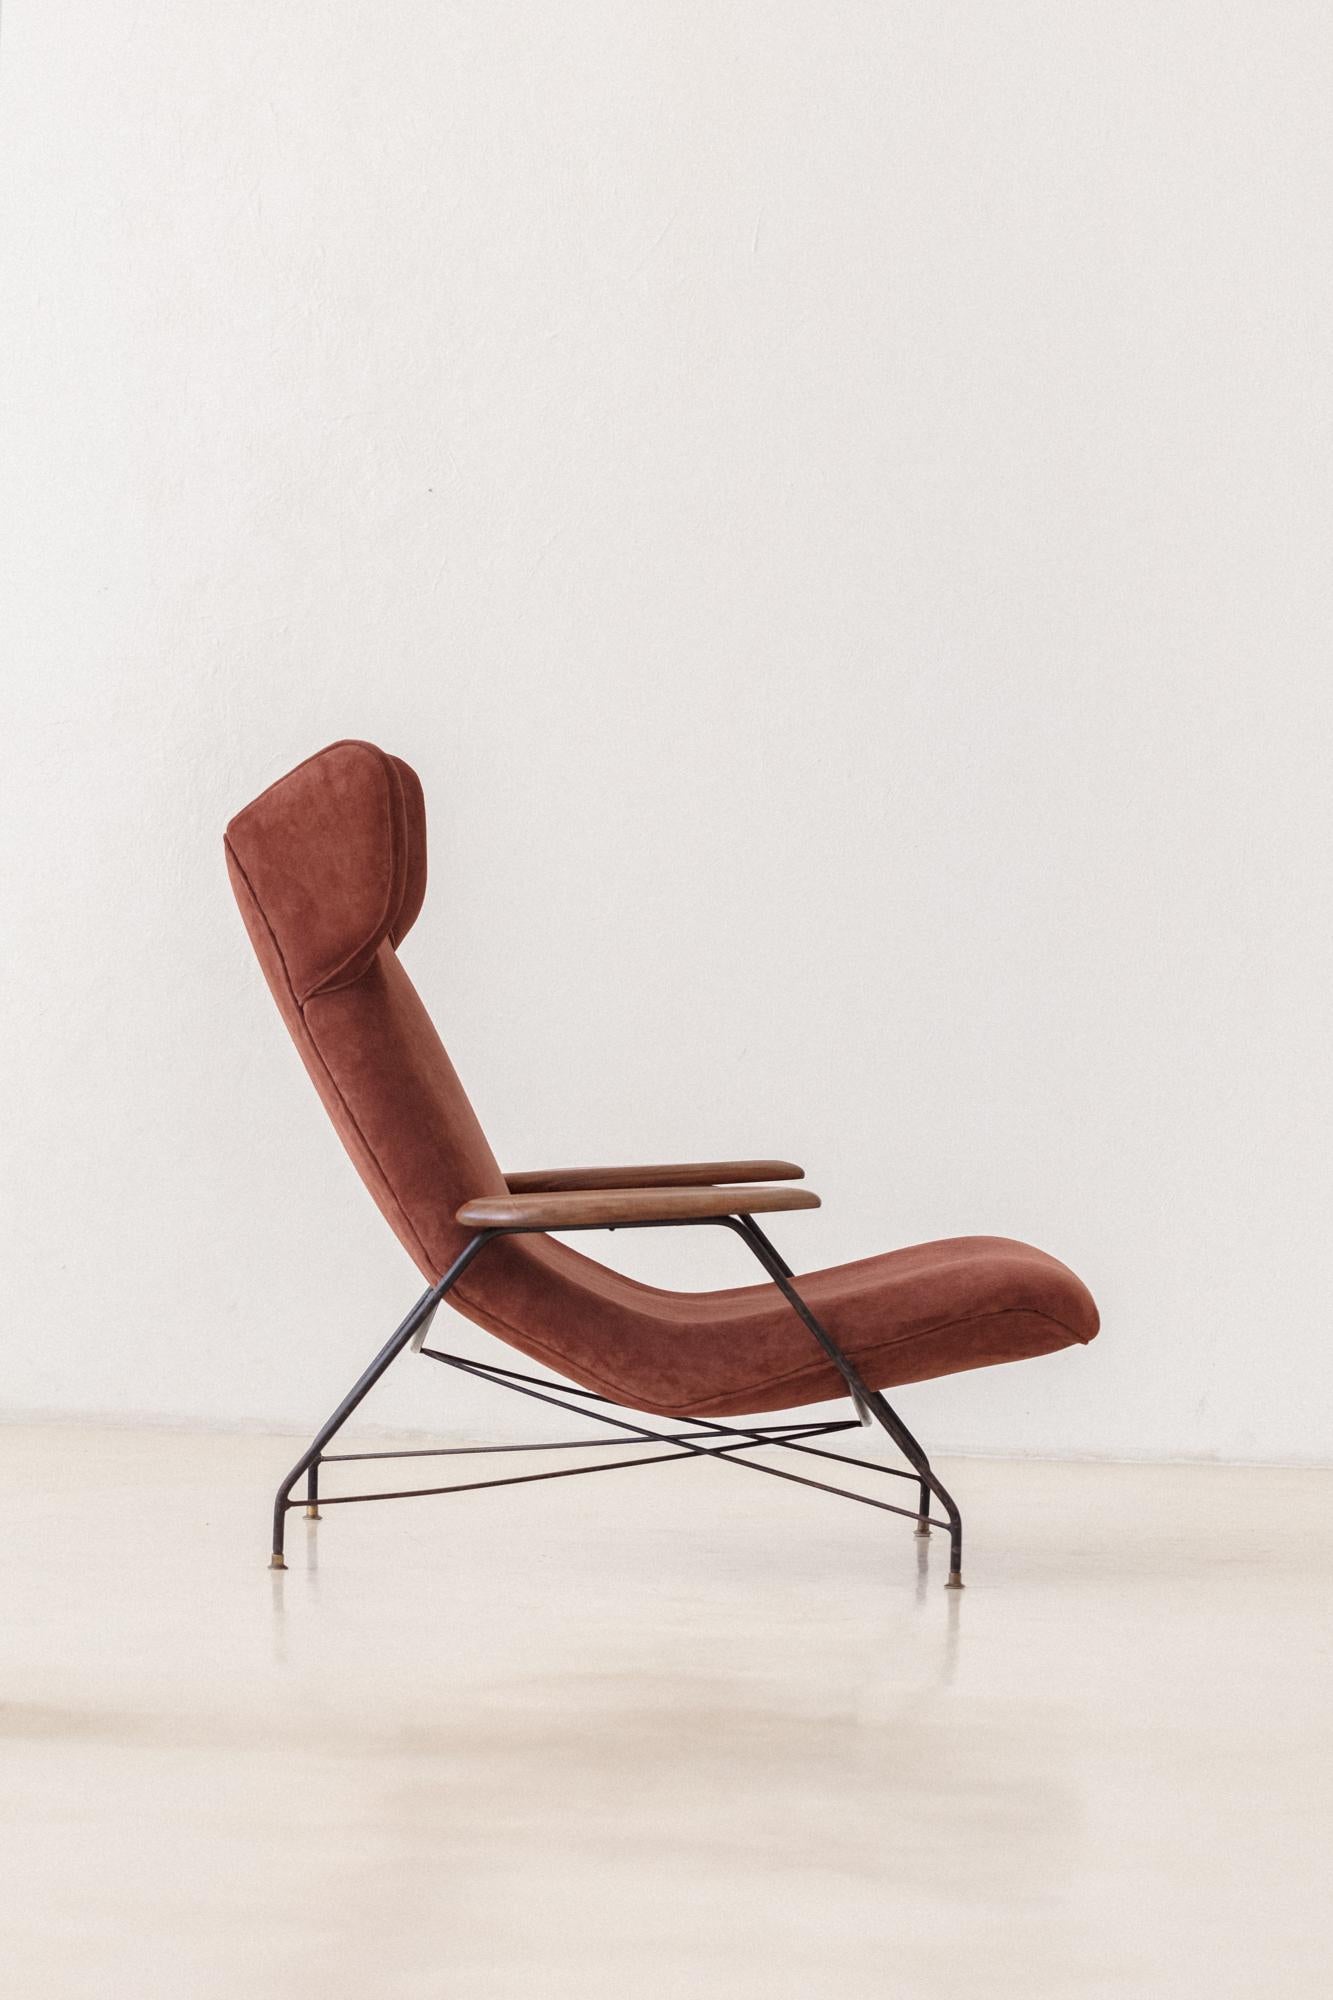 This chaise Lounge is one of the fantastic designs by Martin Eisler (1913-1977) and produced by Móveis Artesanal and then Forma S.A. Móveis e Objetos de Arte. Galeria Artesanal, the first showroom that presented the furniture and objects created by